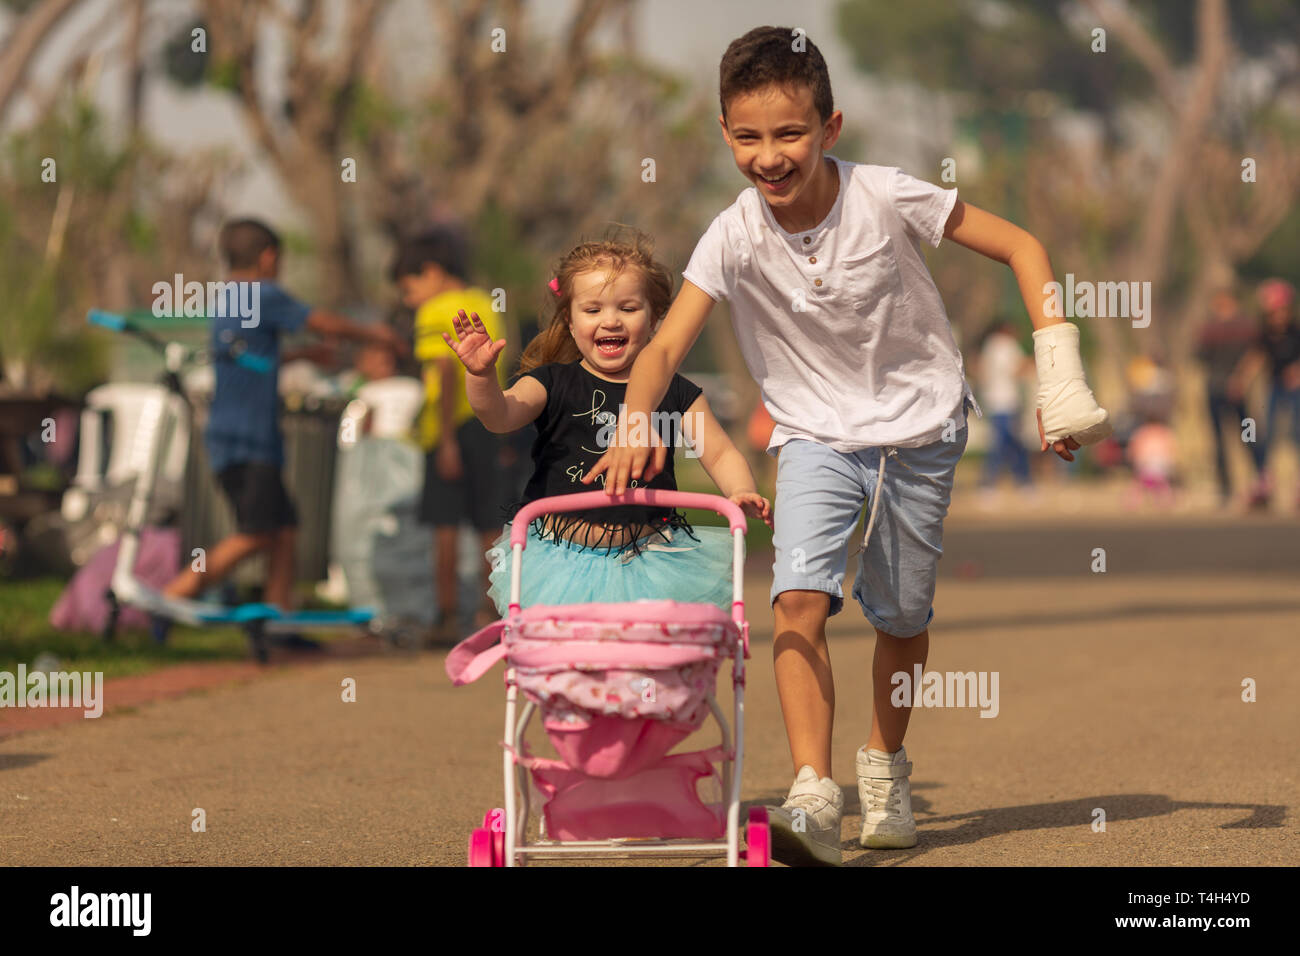 boy and girl play a game of children playing in a pram in a park. Children's friendship. Children with a toy pram Stock Photo